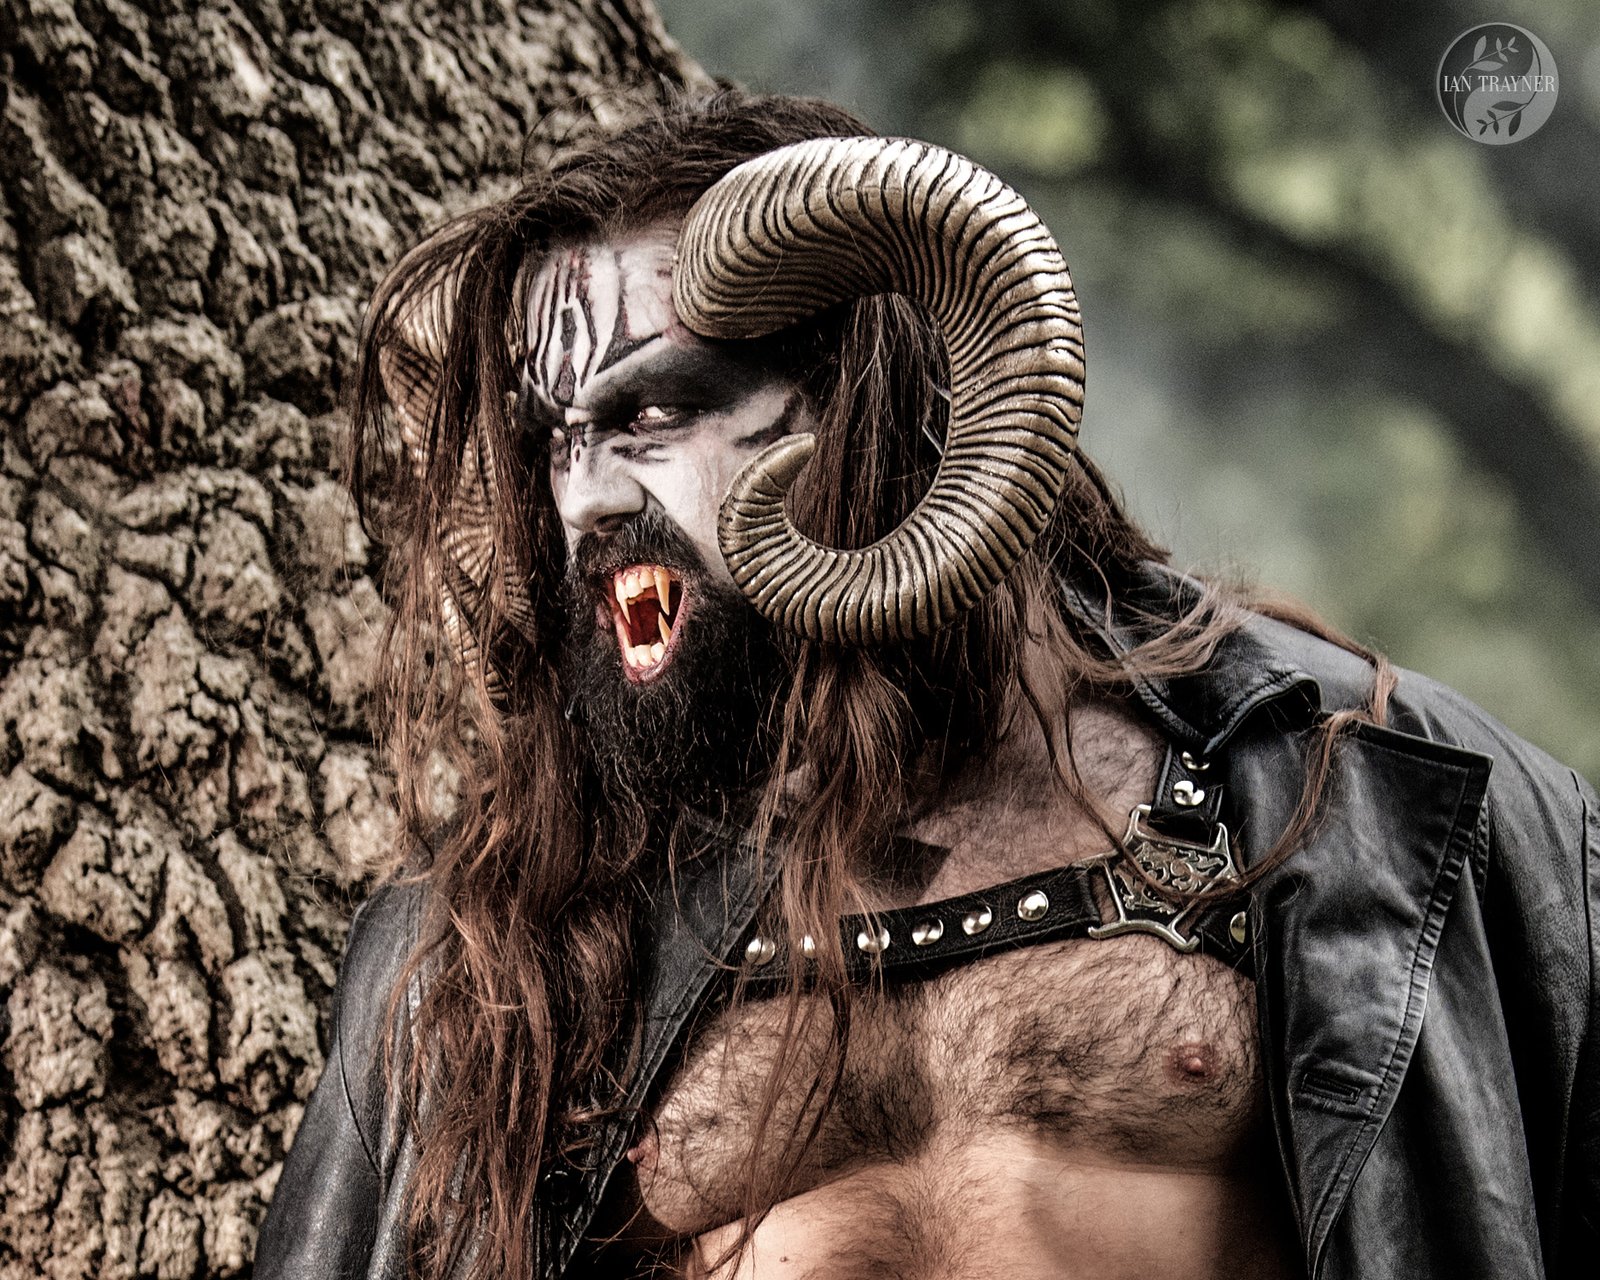 Horned beast played by William Newton, photographed by Ian Trayner, photographer in Kingston, Surrey